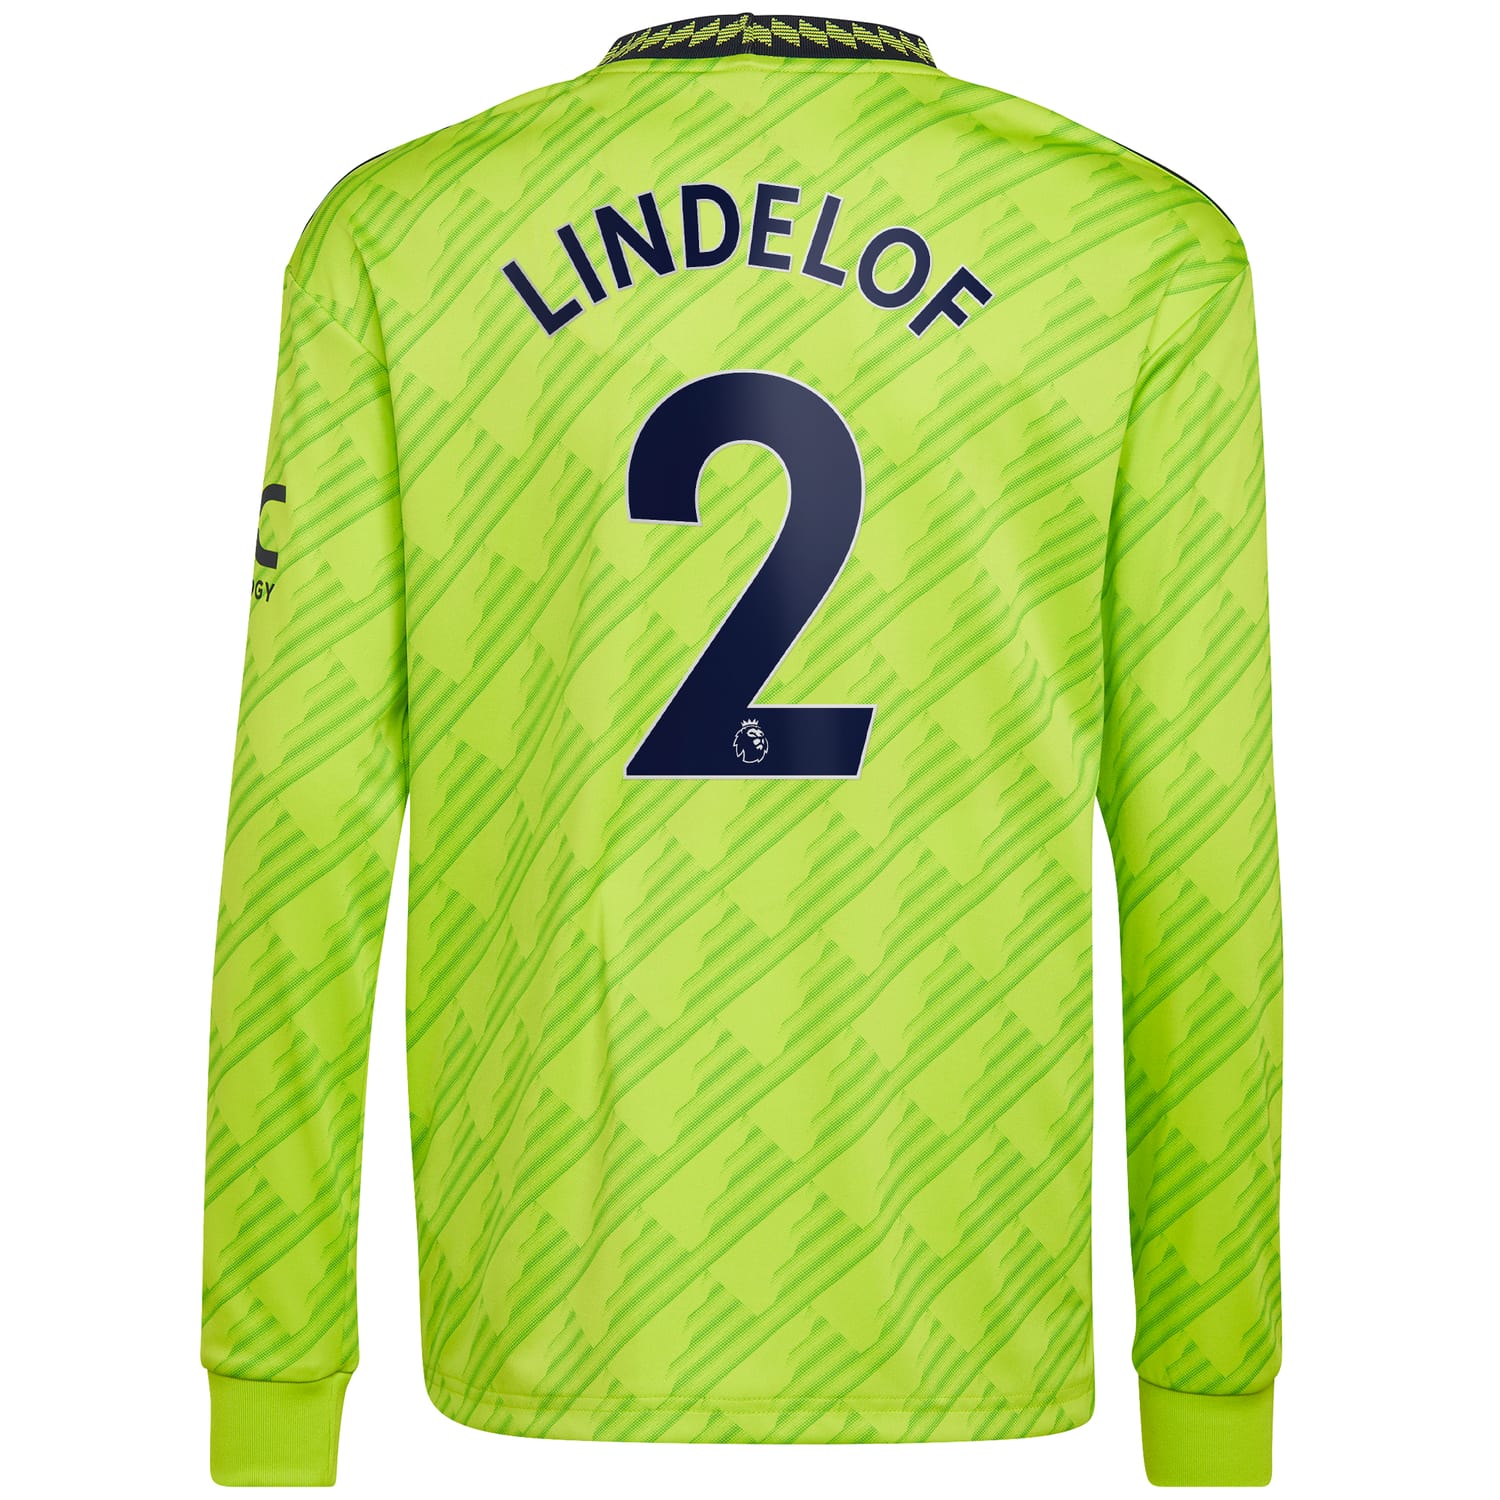 Premier League Manchester United Third Jersey Shirt Long Sleeve 2022-23 player Victor Lindelöf 2 printing for Men